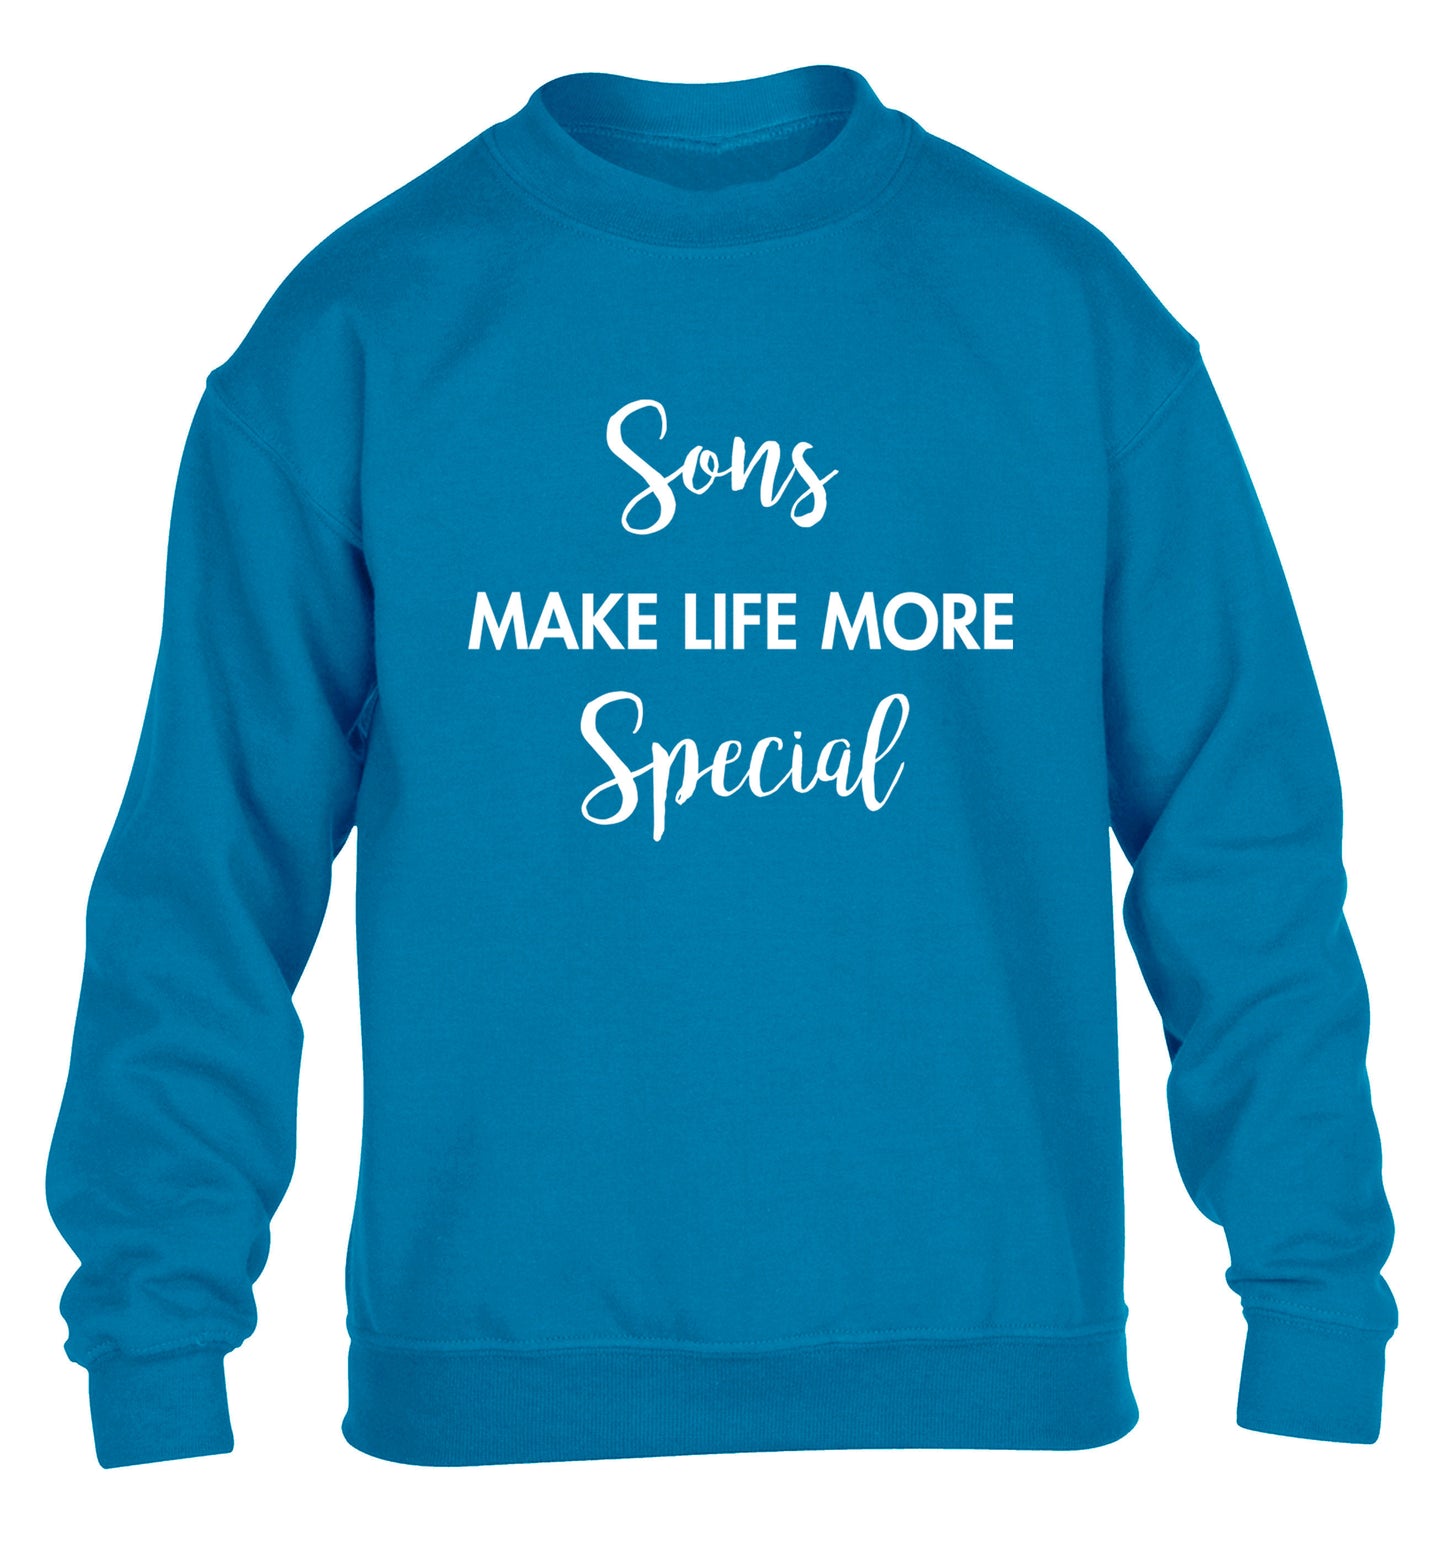 Daughters make life more special children's blue sweater 12-14 Years